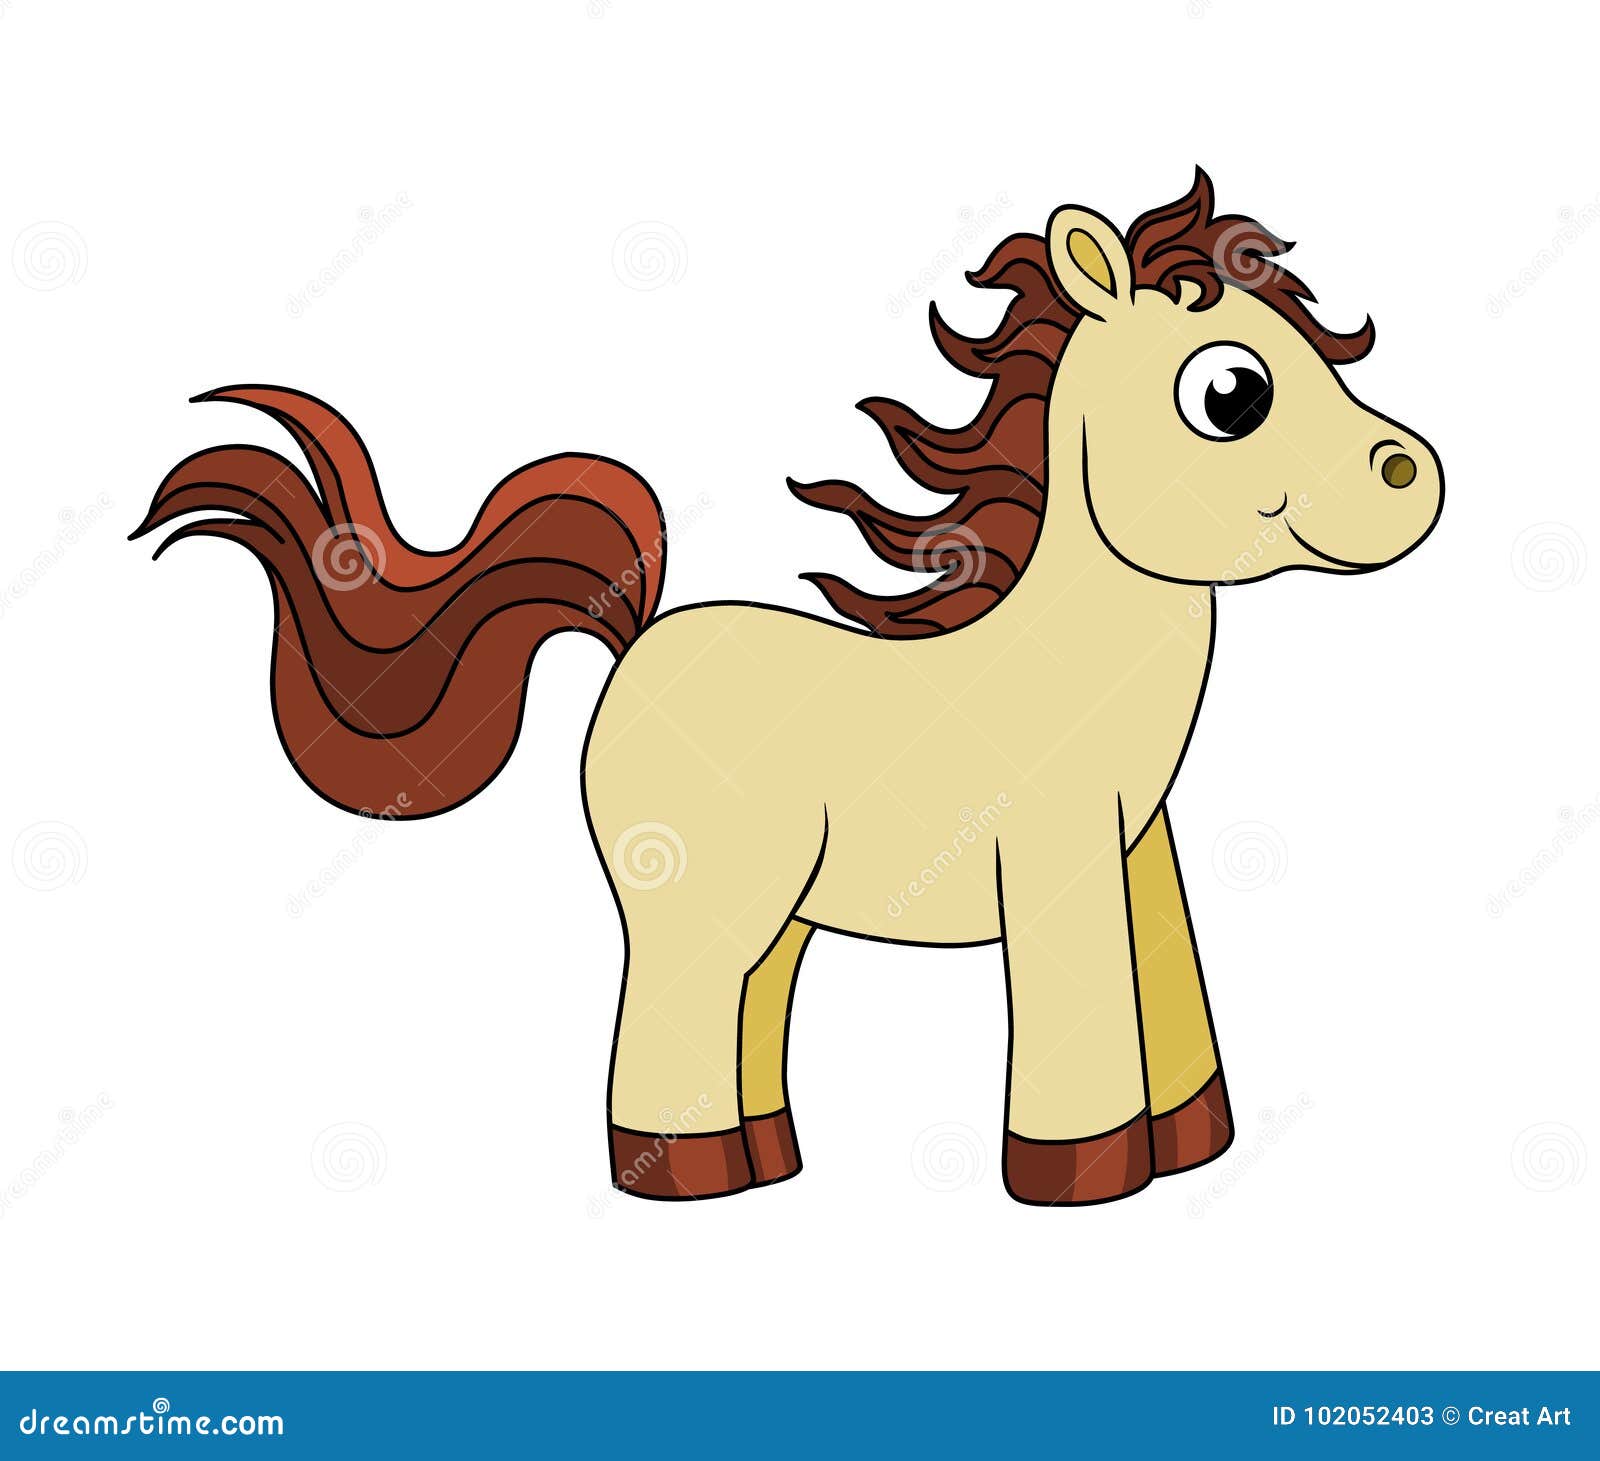 Baby horse stock vector. Illustration of baby, animals - 102052403